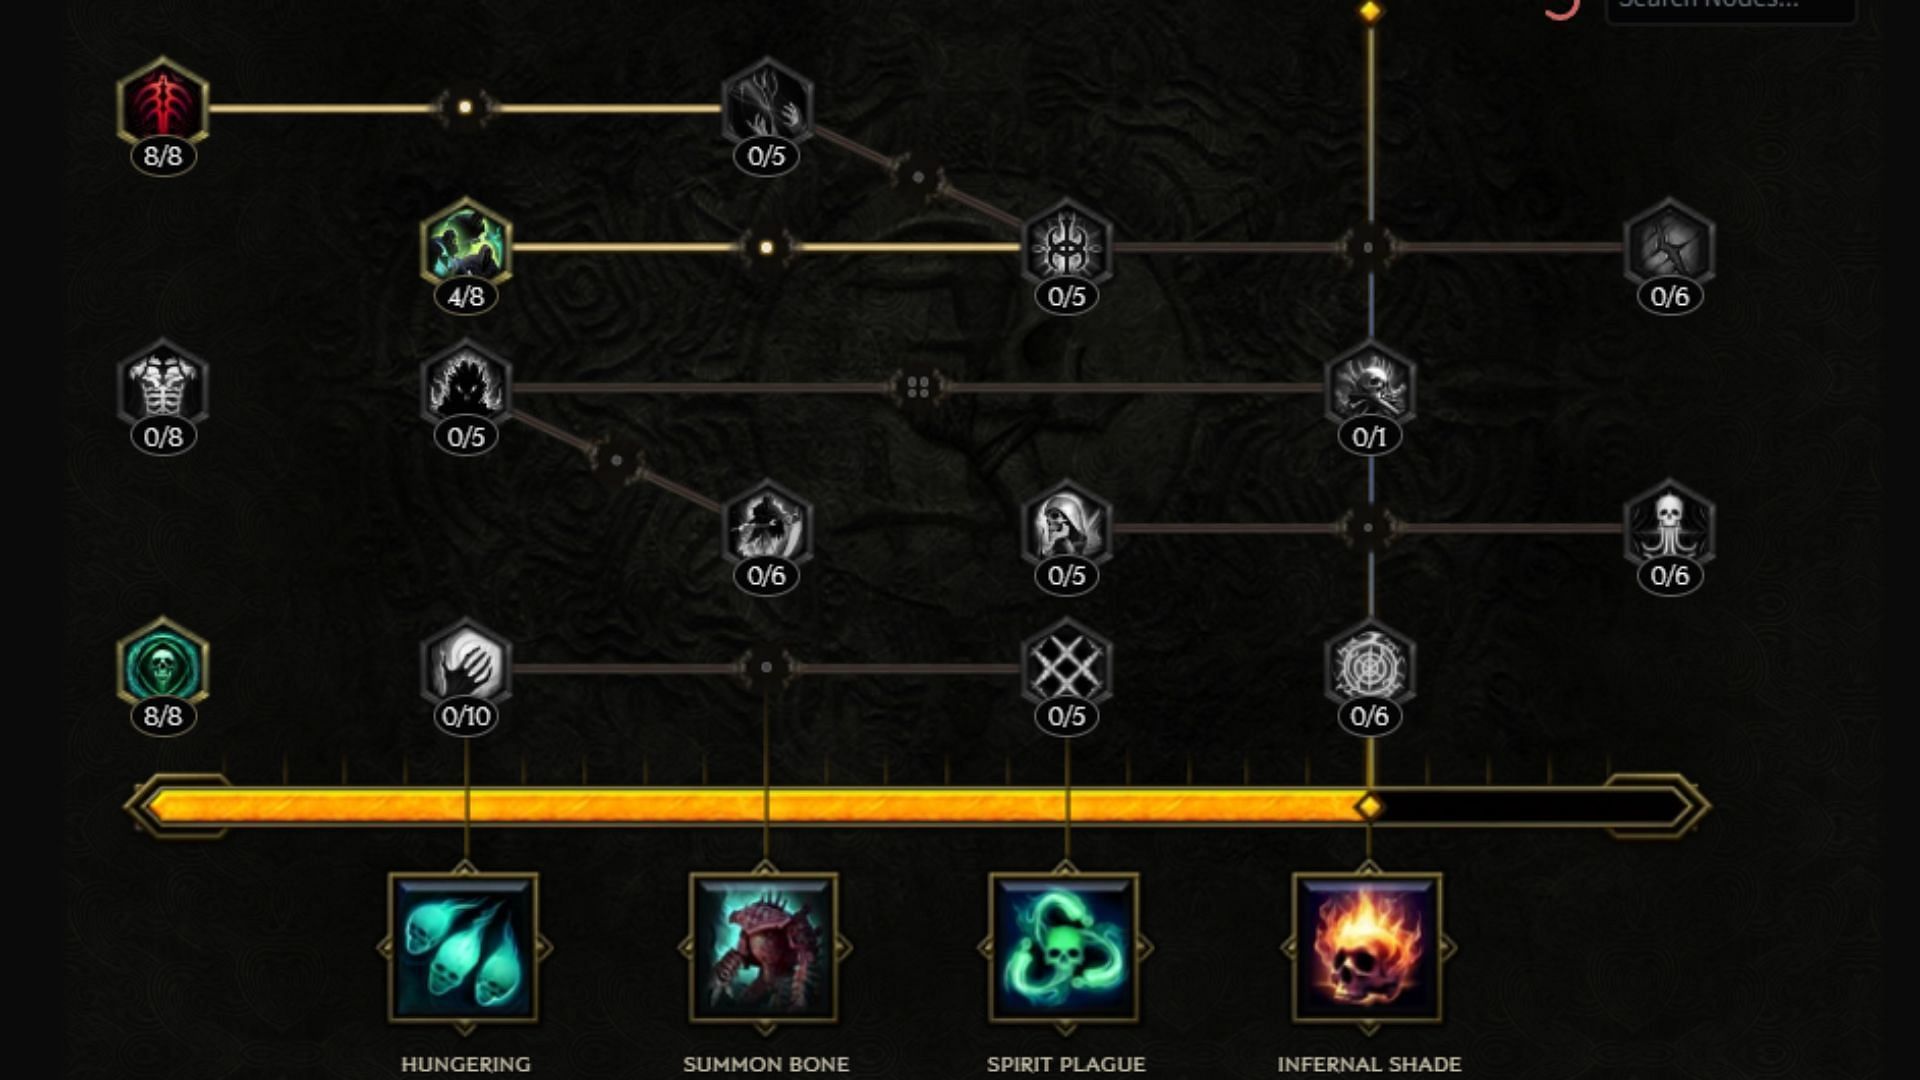 Recommended passives for this build (Image via Last Epoch Tools)